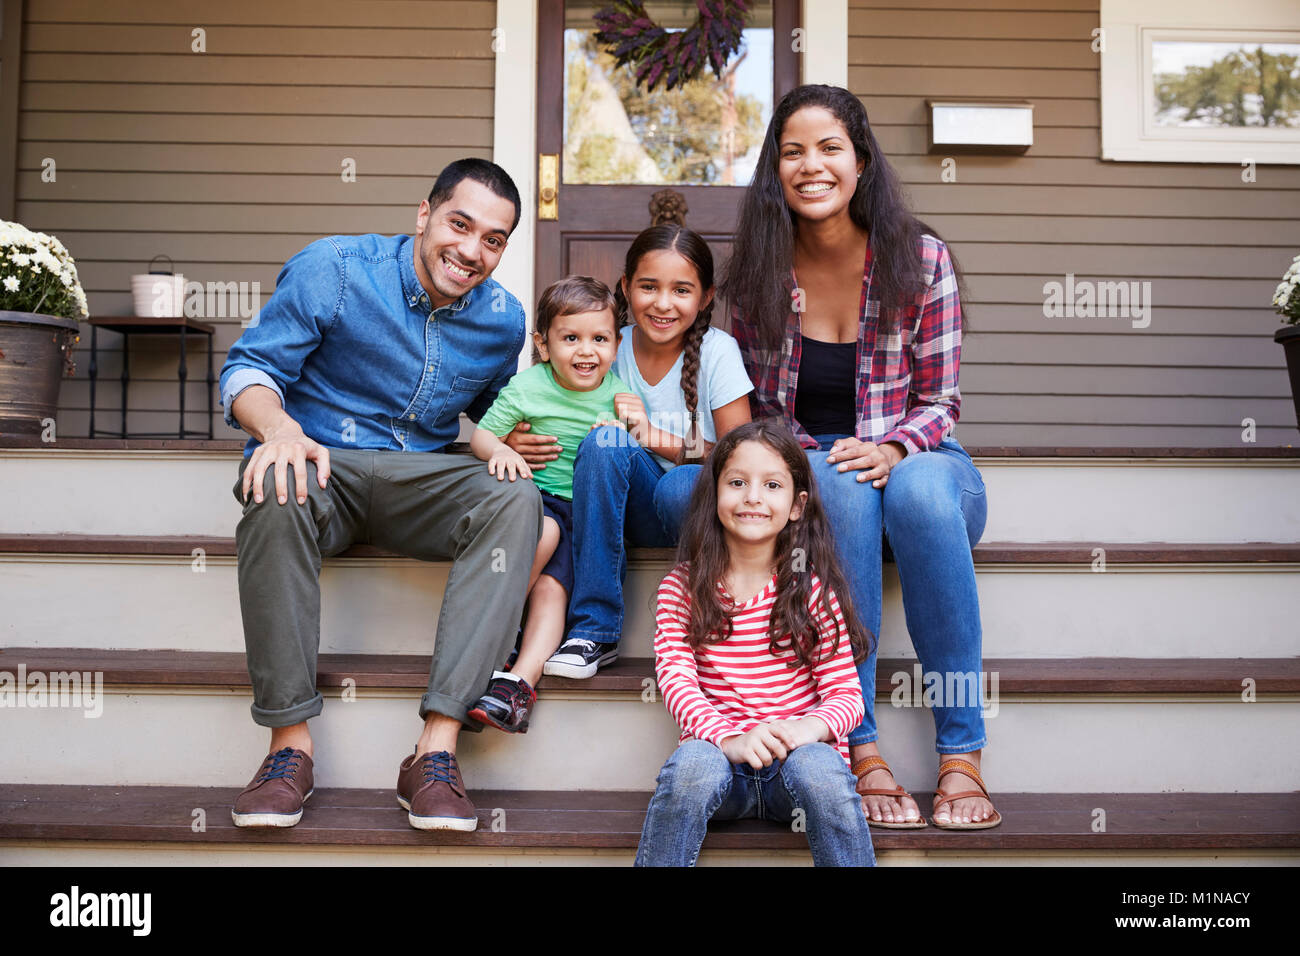 Portrait Of Family Sitting on Steps in Front of House Banque D'Images